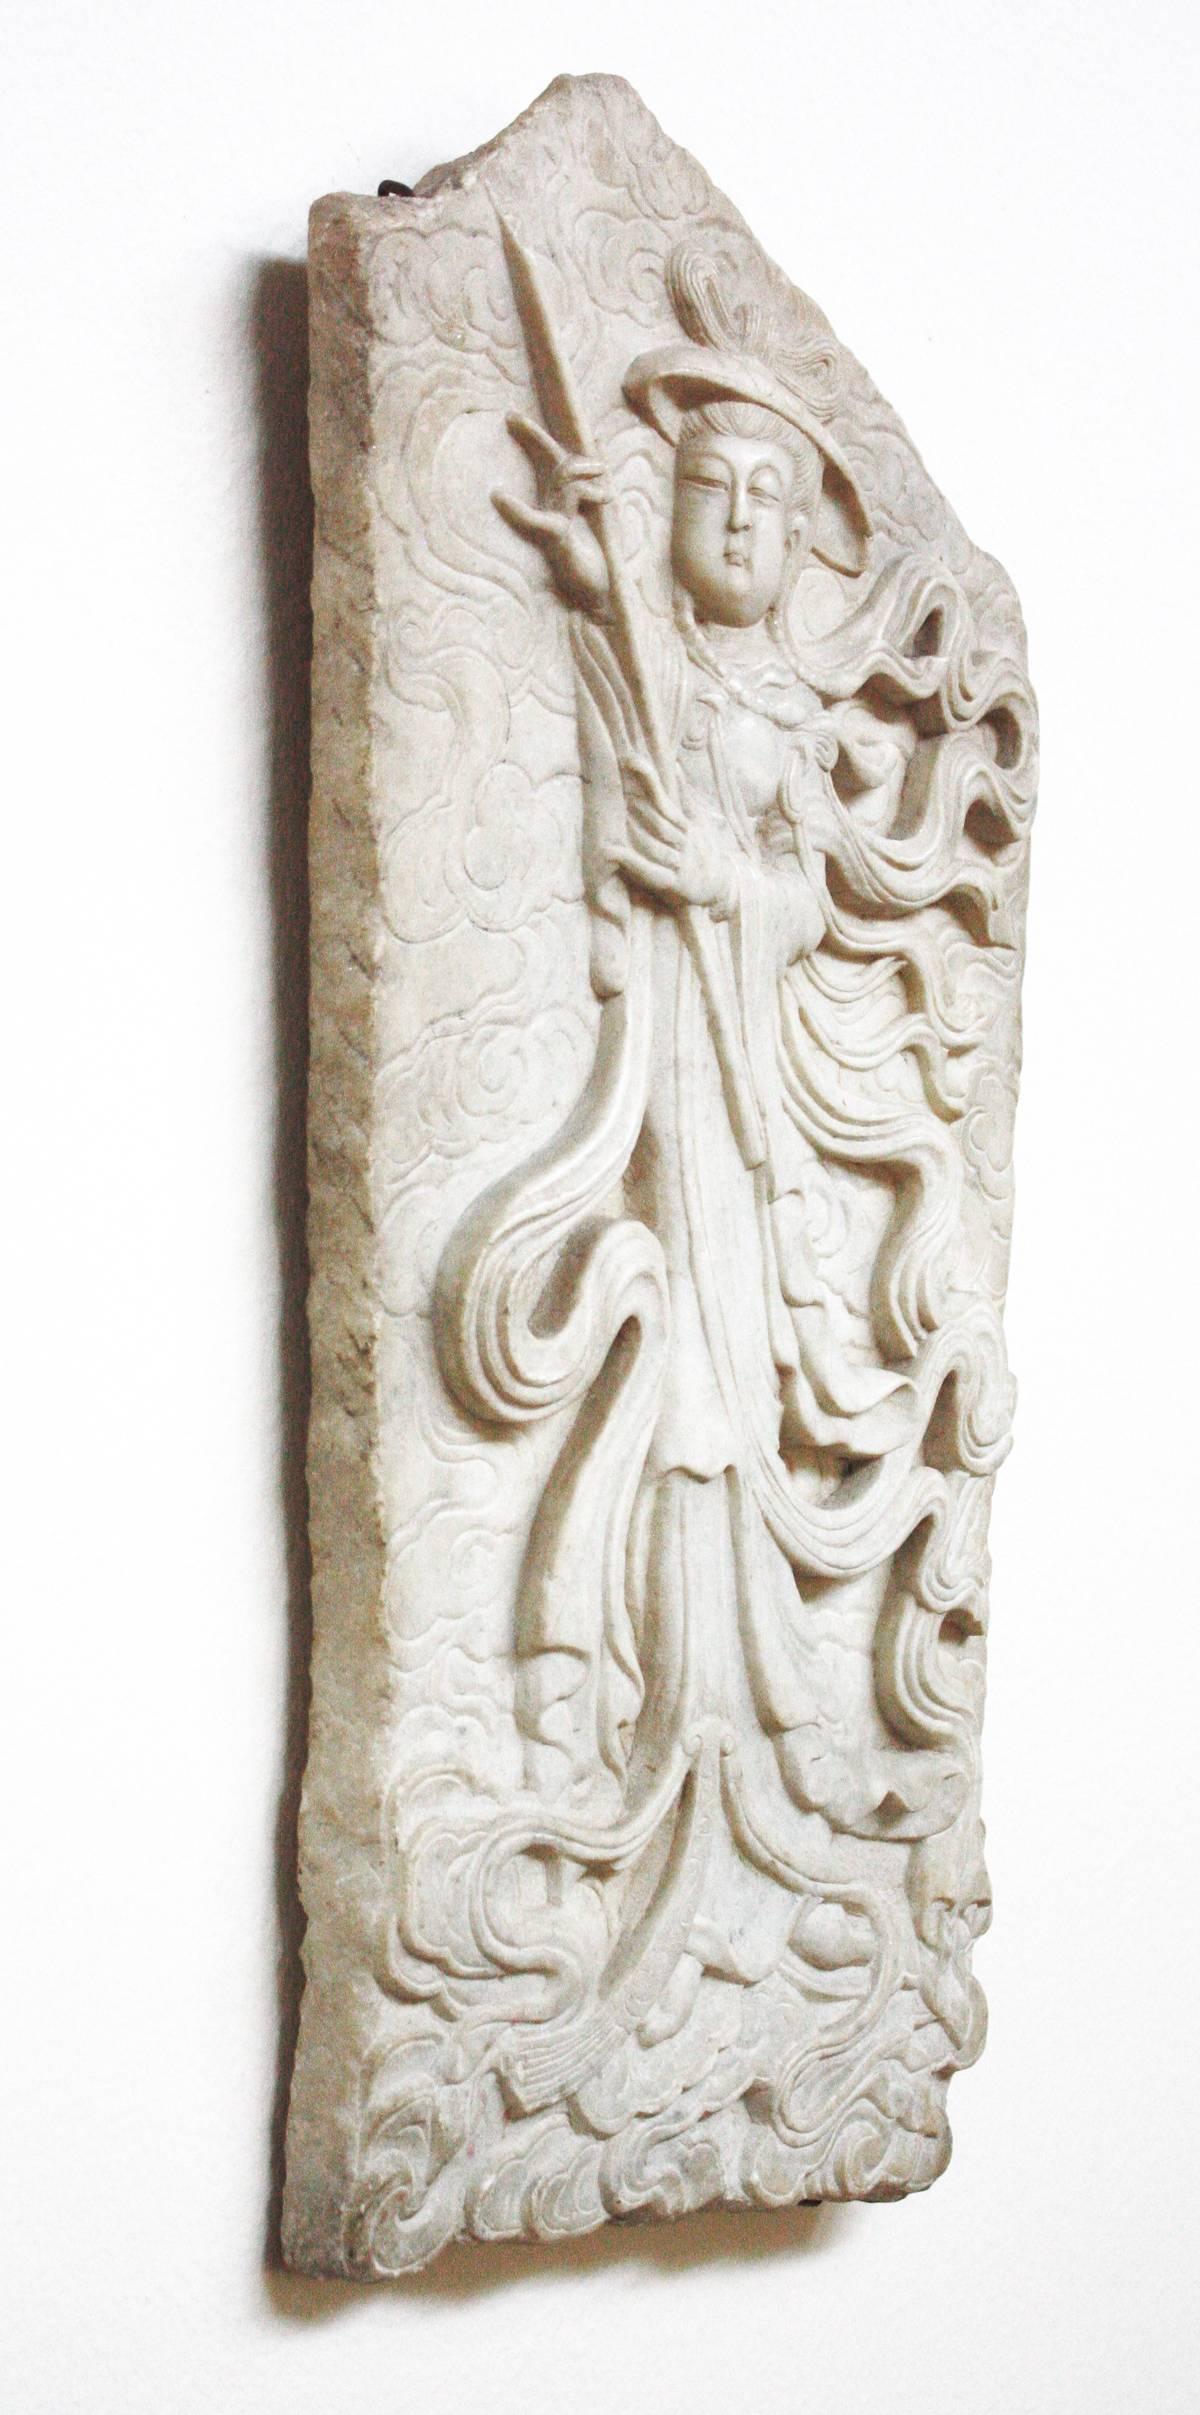 An antique Japanese marble wall carving in bas-relief of a male figure with swirling ribbons from his coat and carrying a long wand.